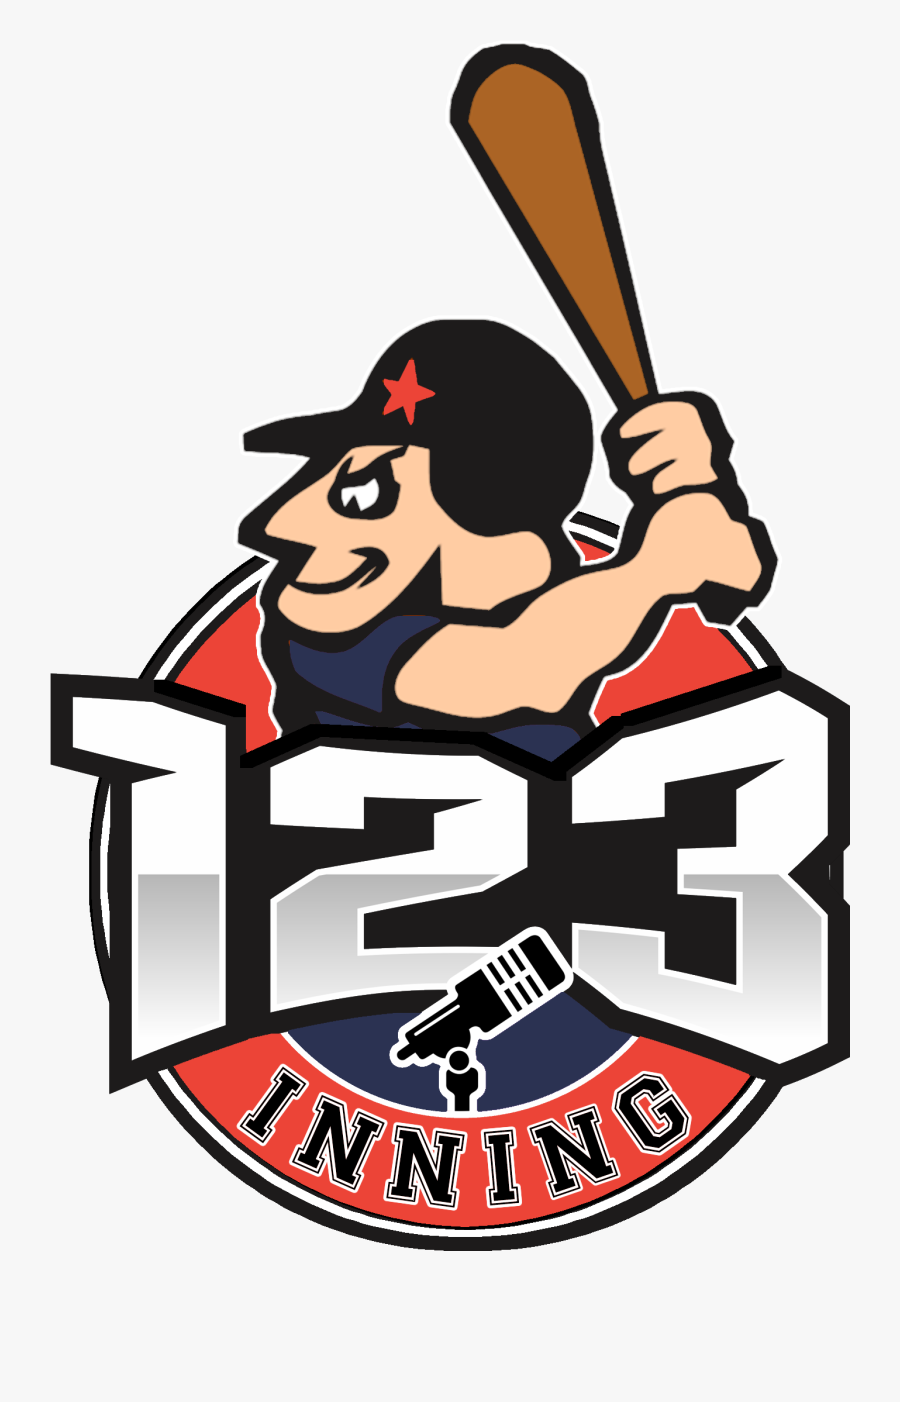 123 Inning Podcast, Transparent Clipart